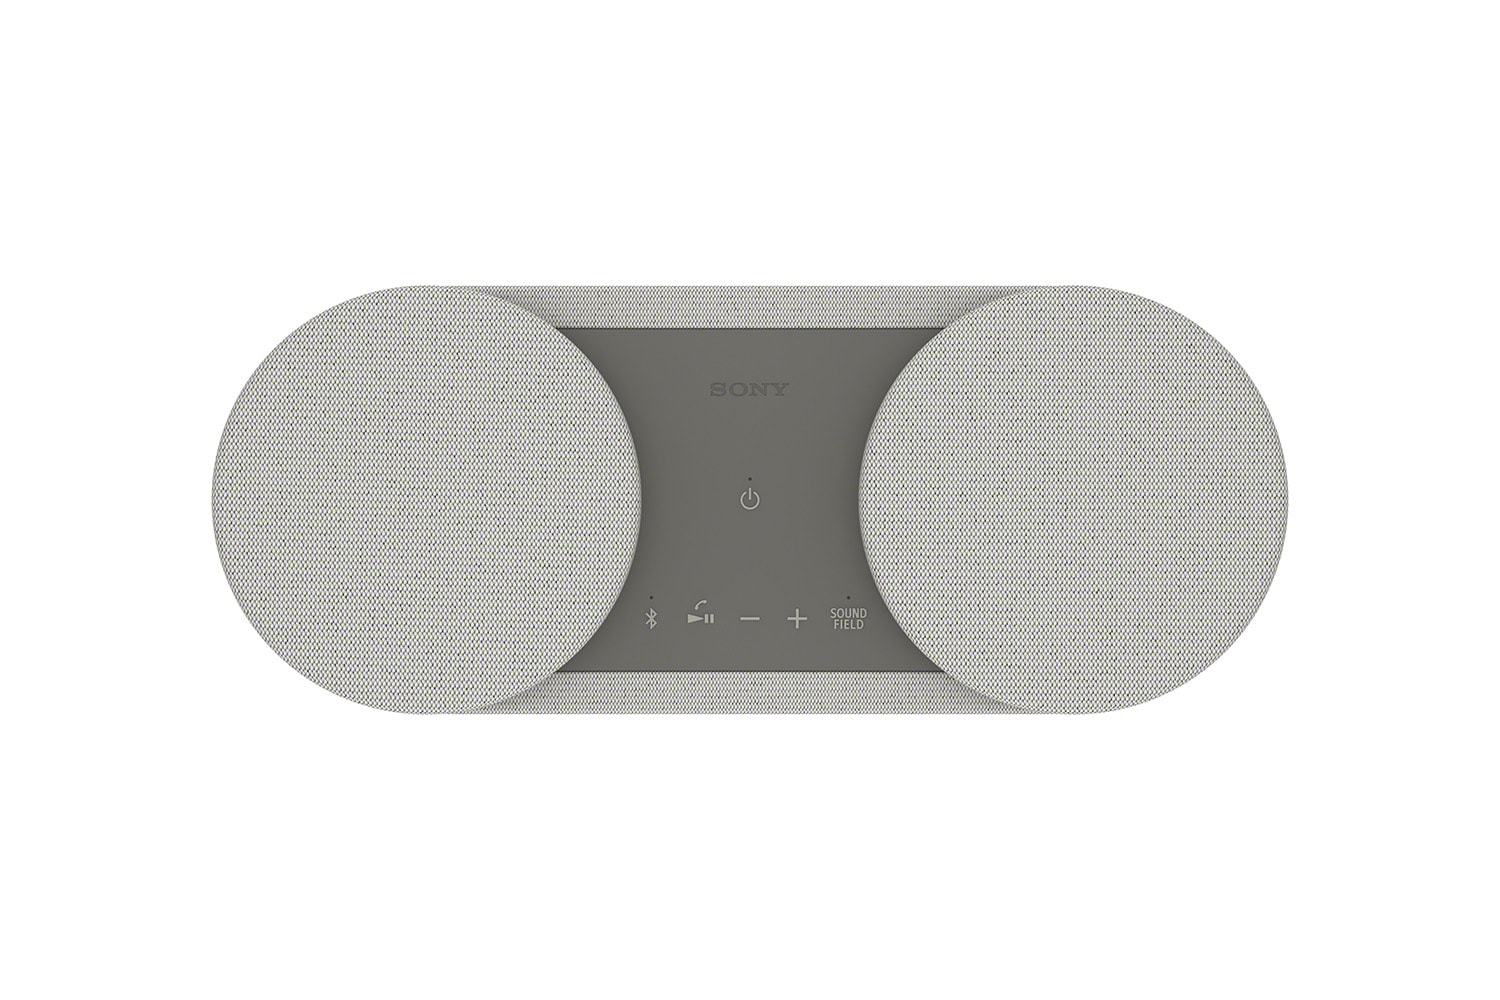 Sony's HT-AX7 is a Portable Surround Sound System Spatial Audio Bluetooth Speaker Apple Bose